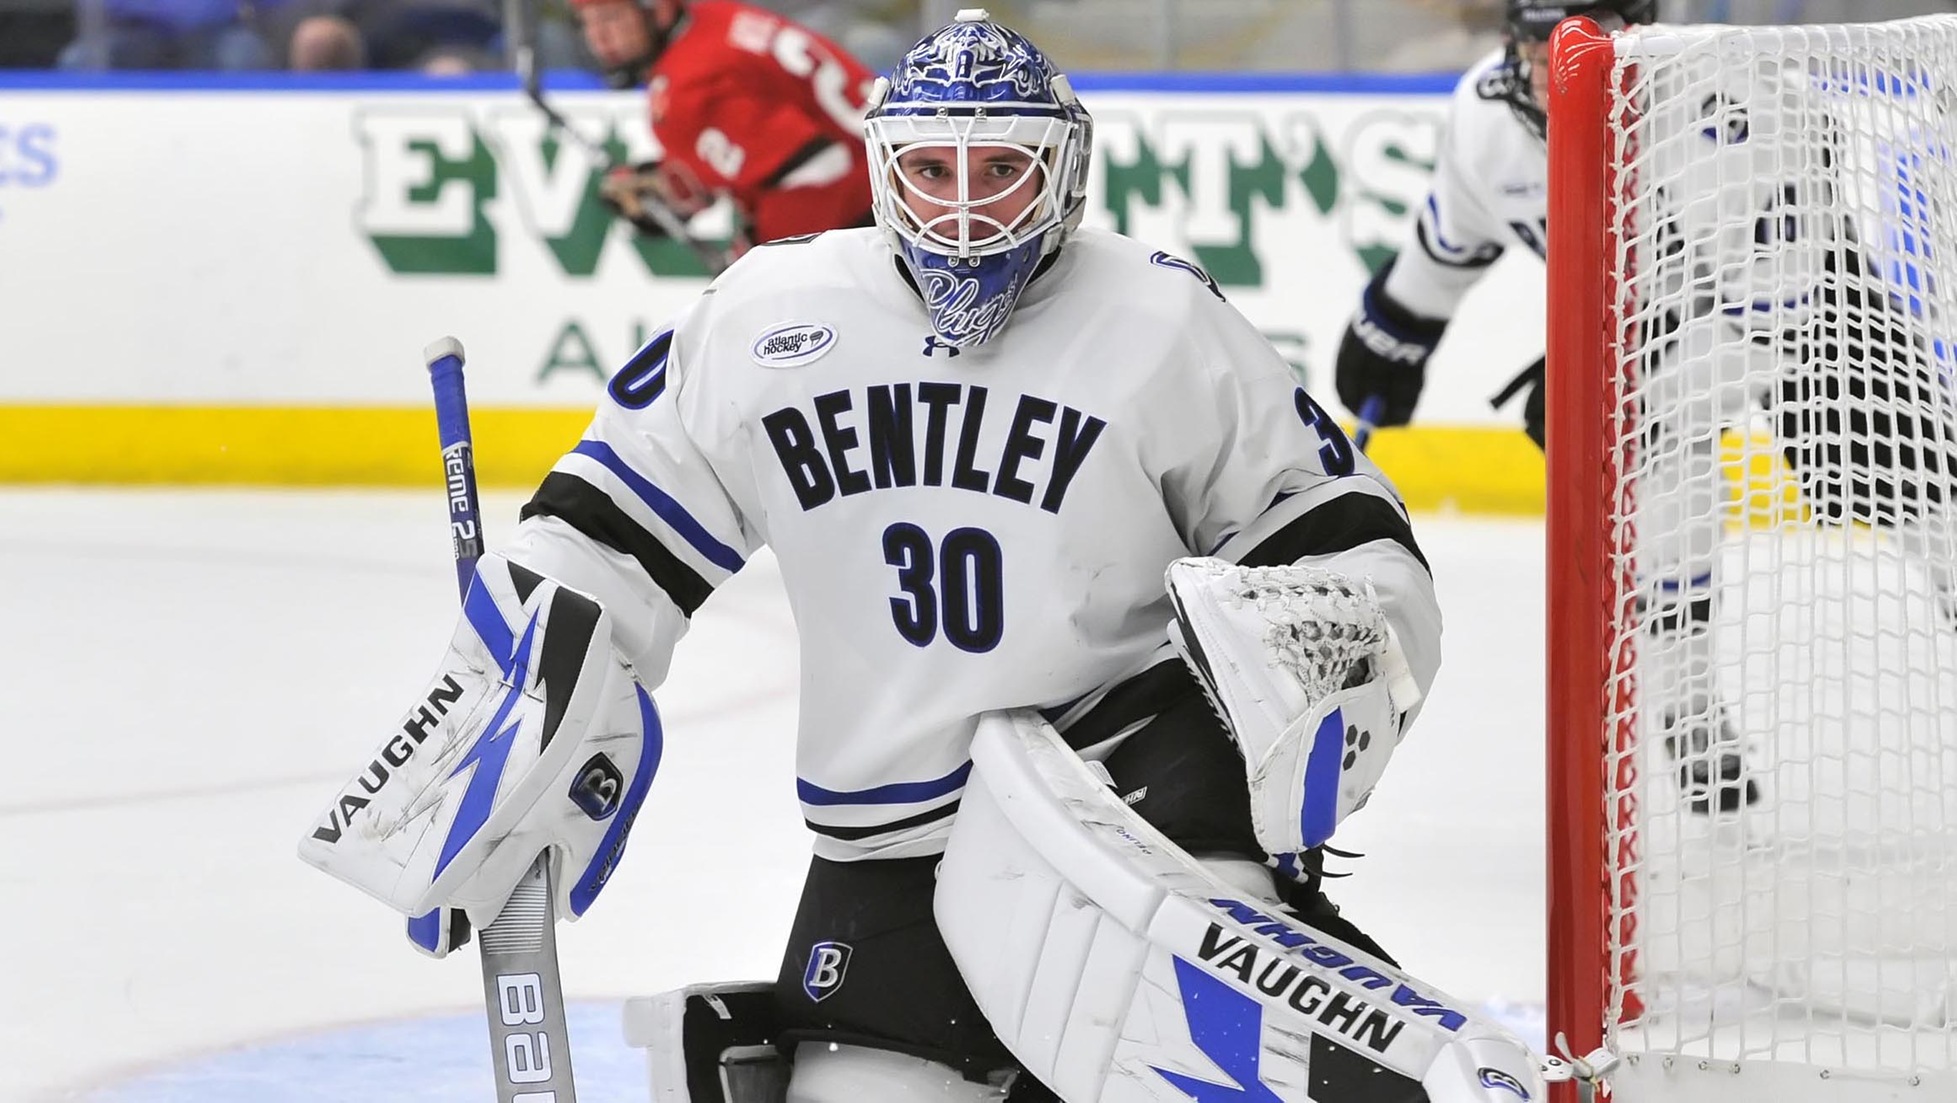 Bentley Clinches Home-Ice in First Round with 3-2 Victory over Holy Cross